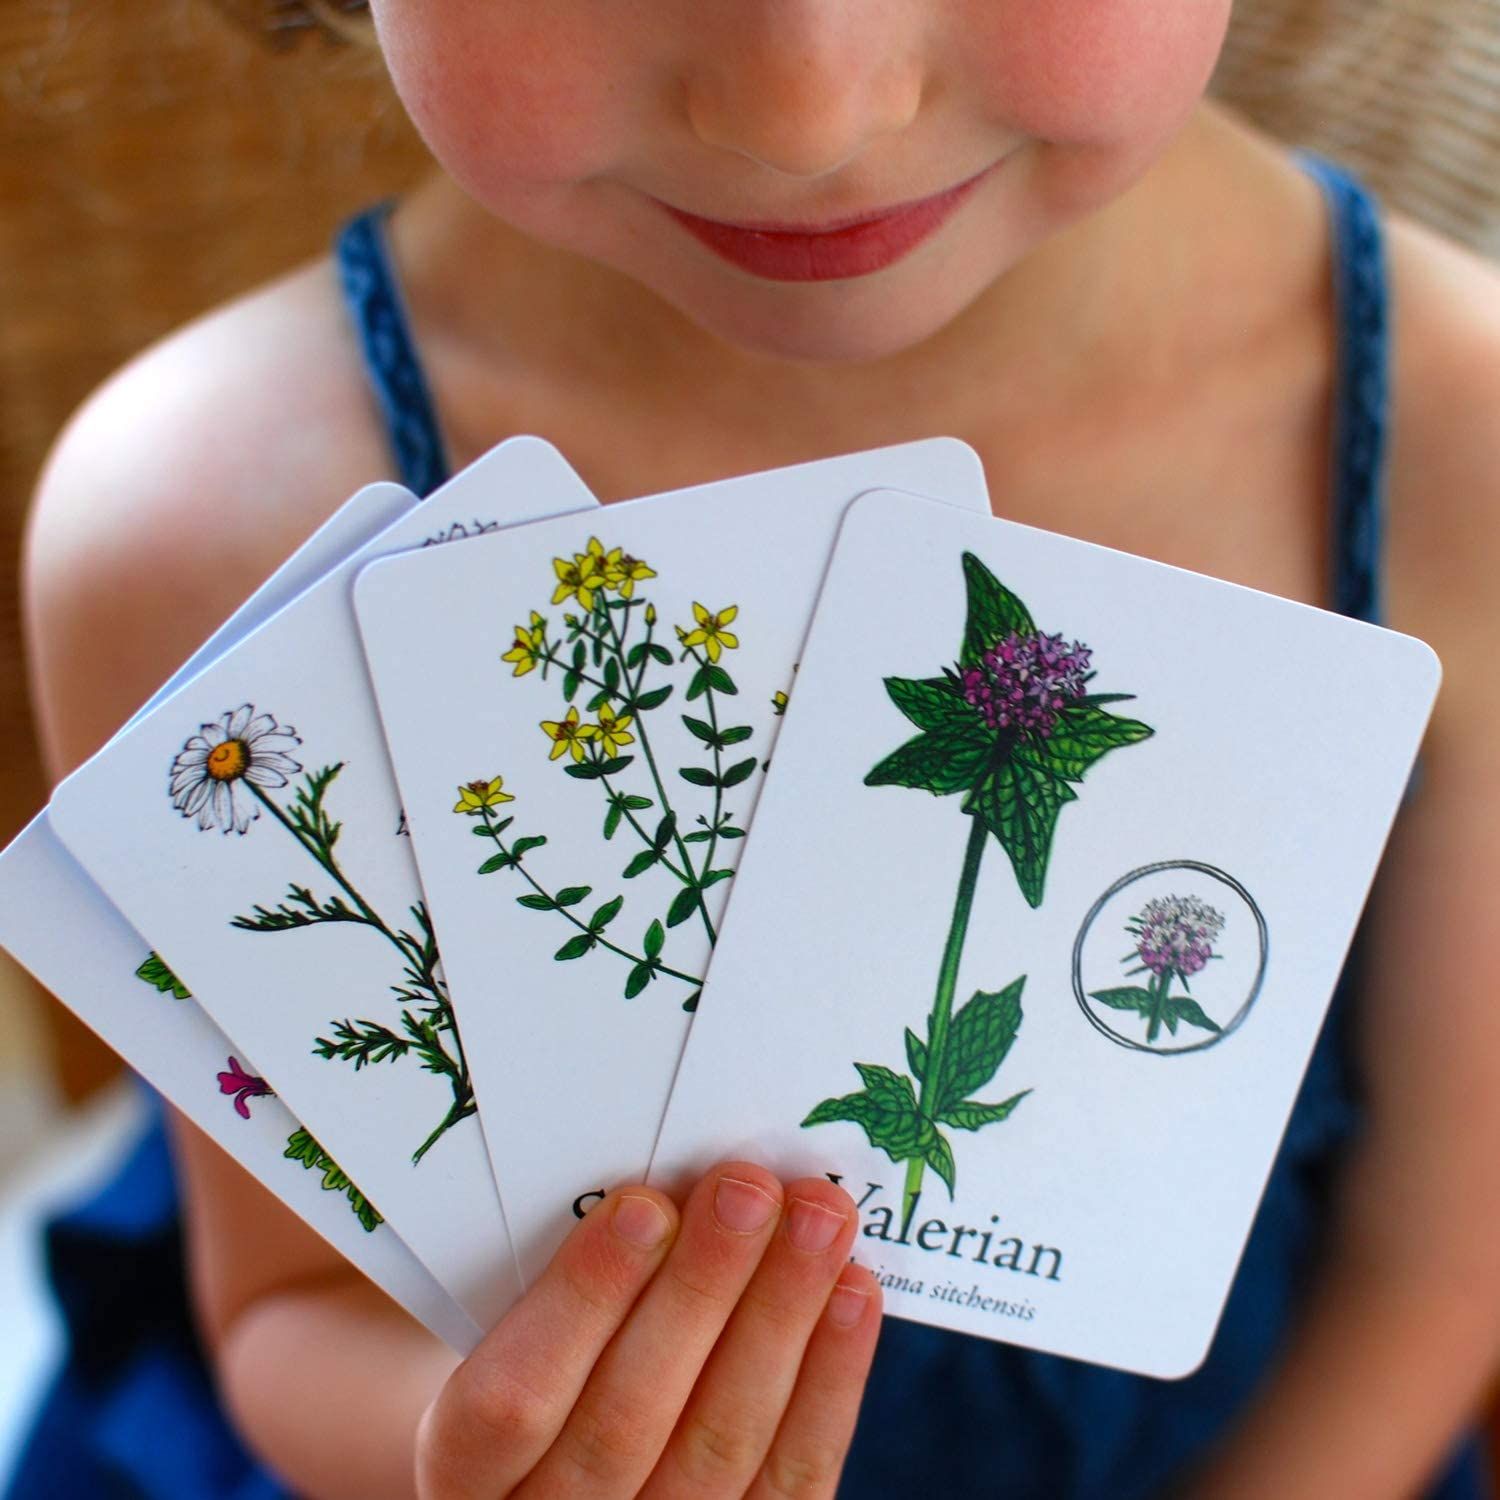 Wildcraft Herbal Adventure Game is one of the most beautiful board games for kids